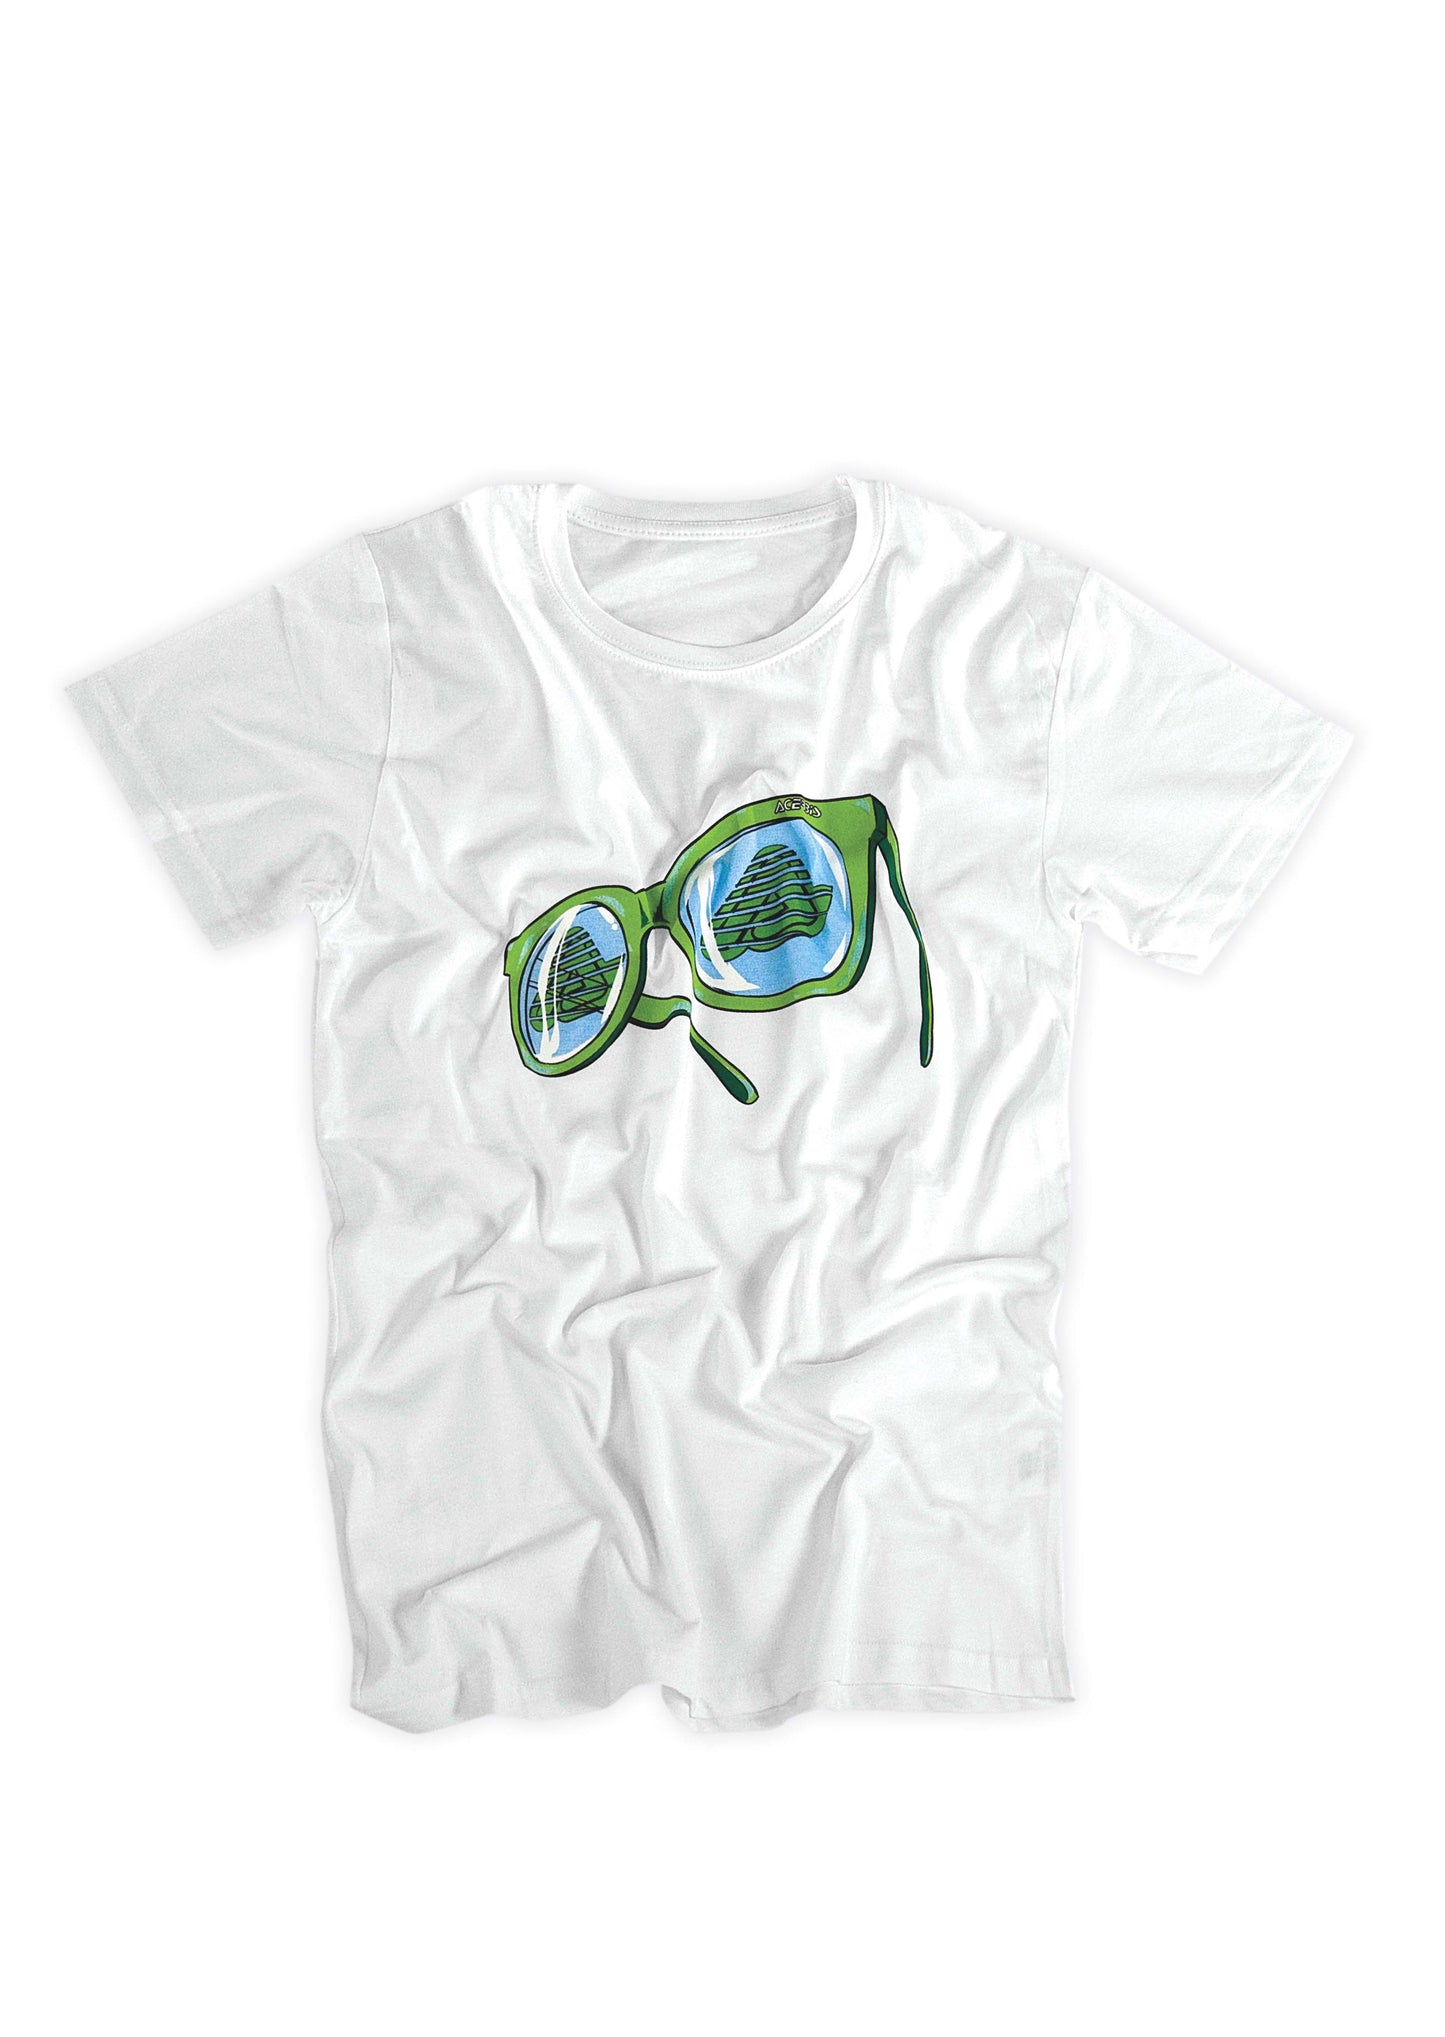 **Vision T-Shirt White NOW £6.00